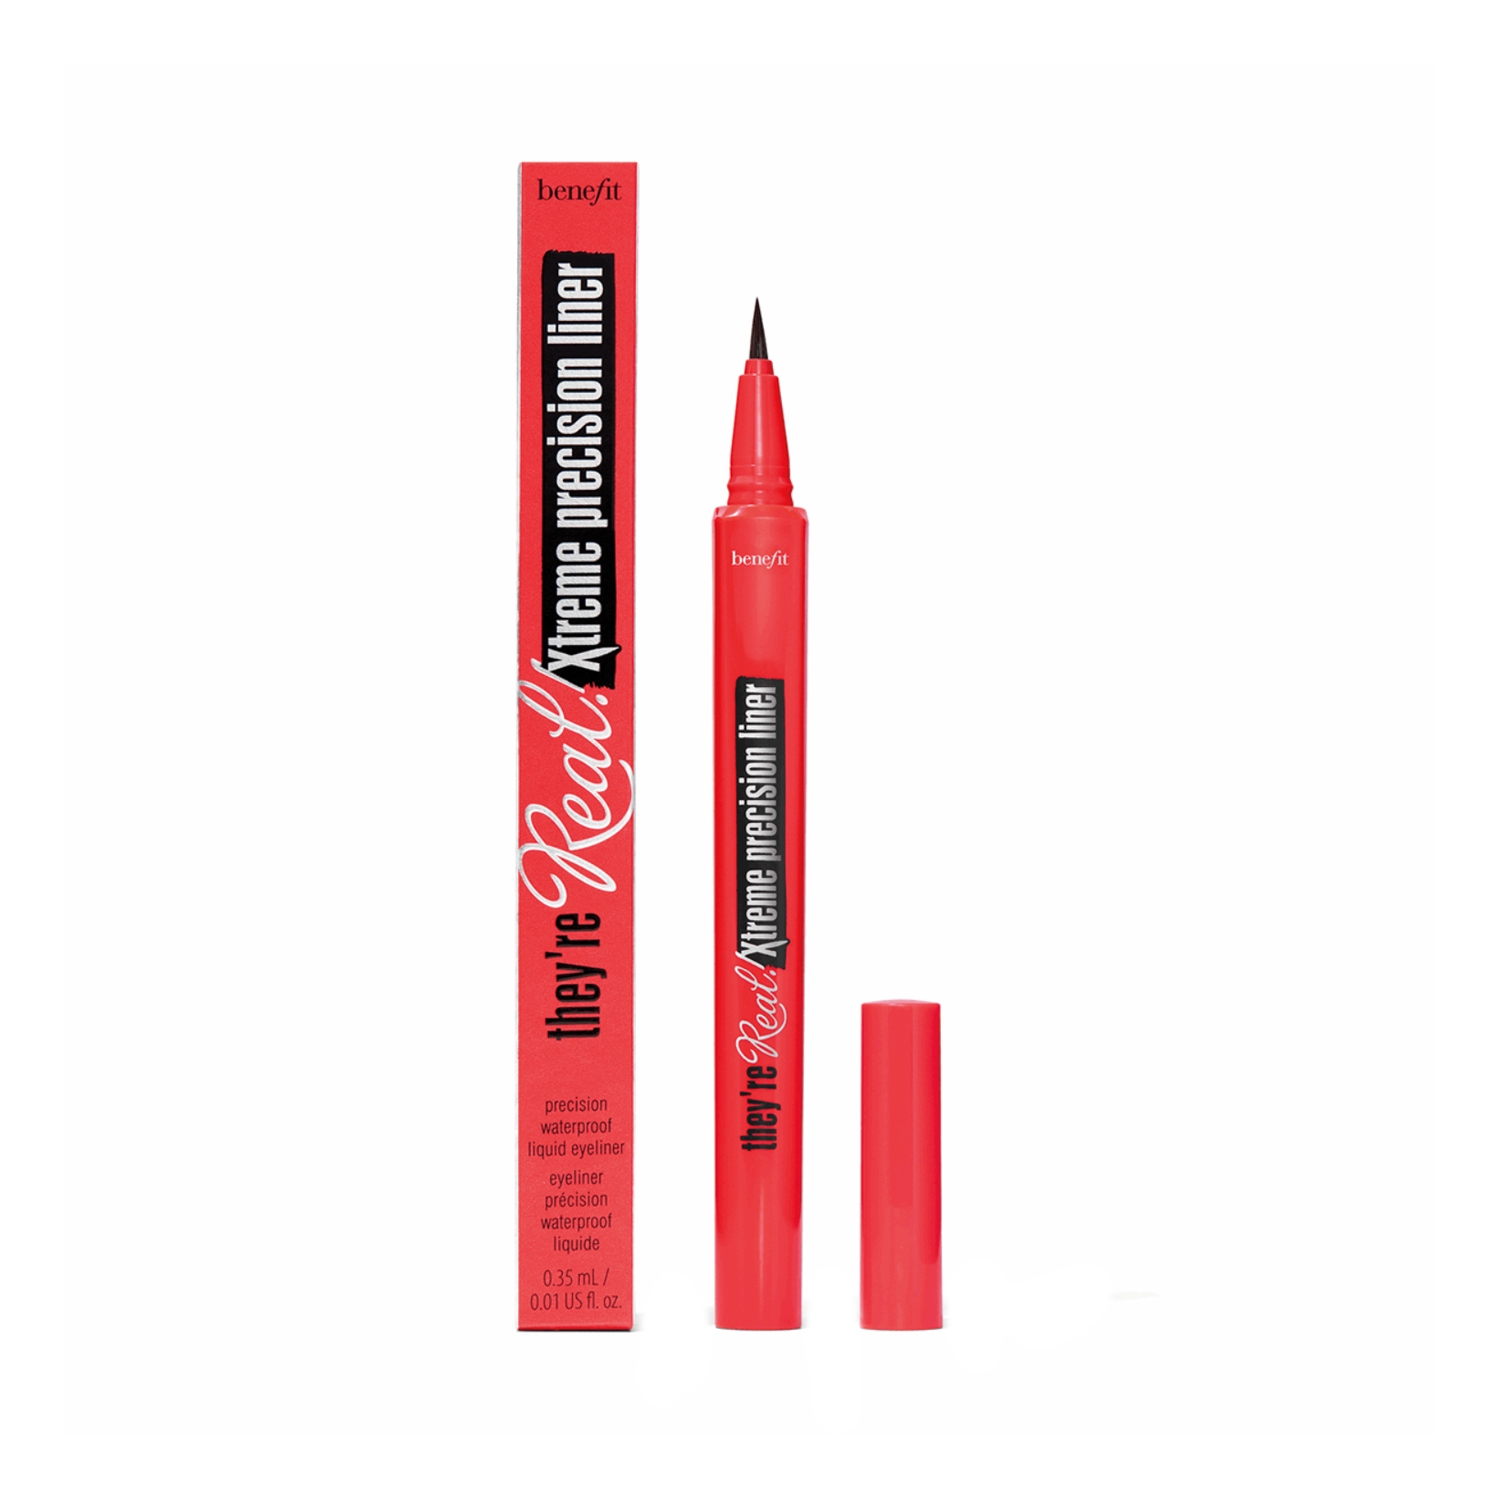 Benefit Cosmetics | Benefit Cosmetics They're Real! Xtreme Precision Eyeliner - Black (0.35ml)